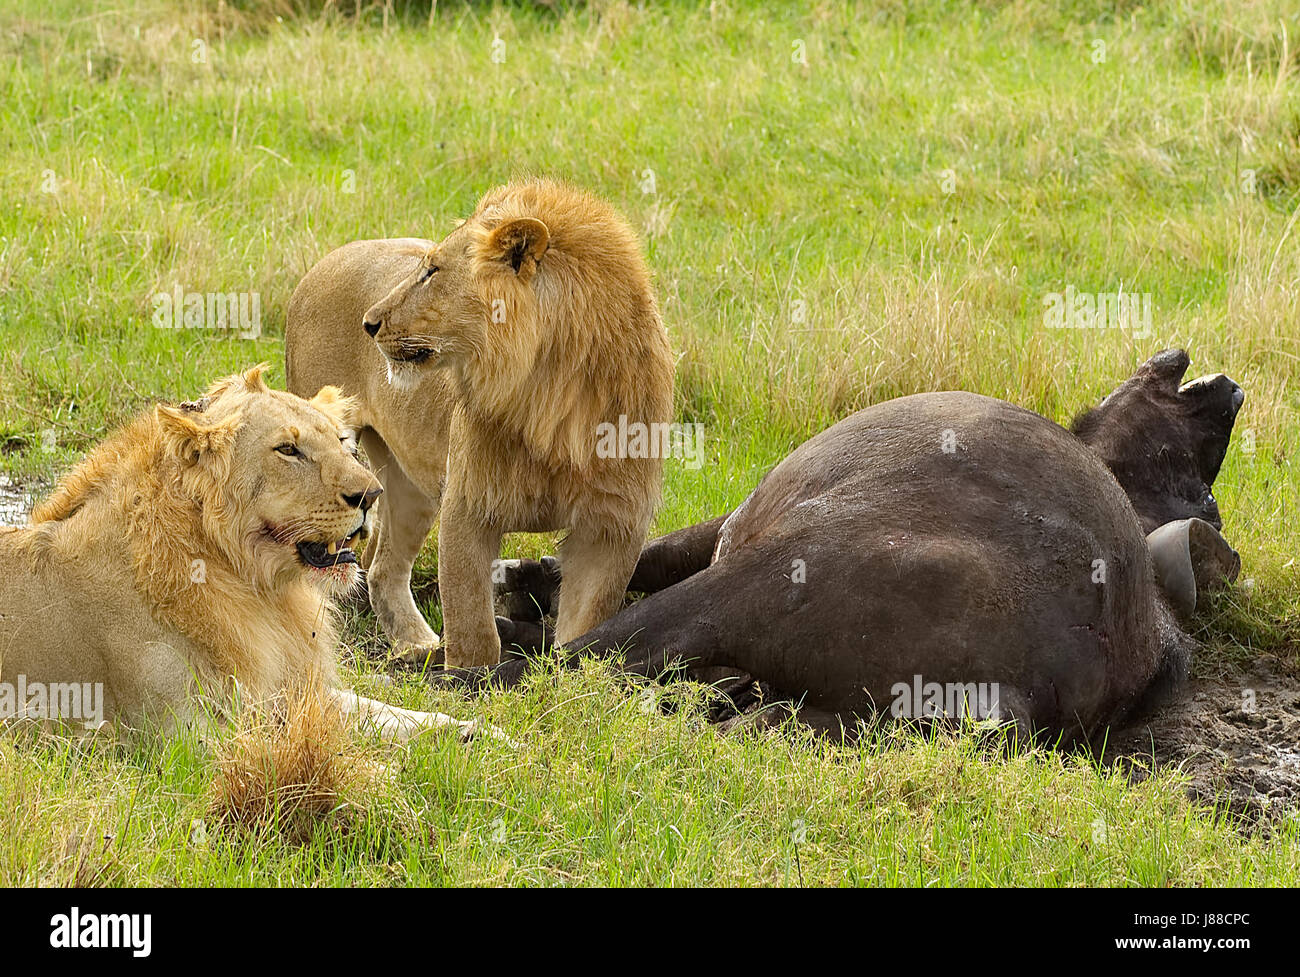 Lions Hunting Buffalo High Resolution Stock Photography and Images - Alamy